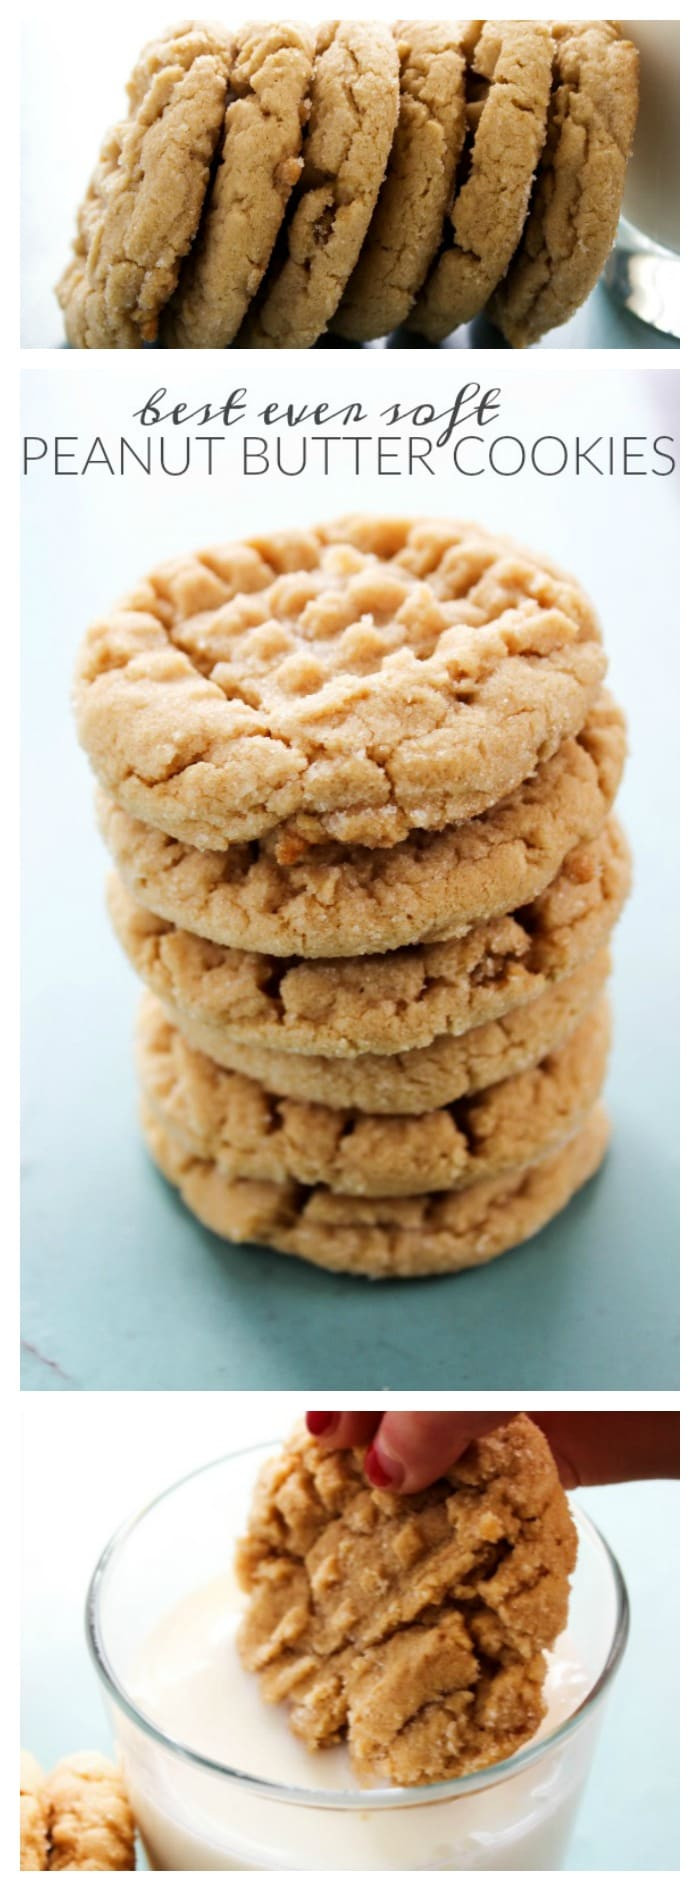 Easy Soft Peanut Butter Cookies
 BEST EVER SOFT PEANUT BUTTER COOKIES A Dash of Sanity